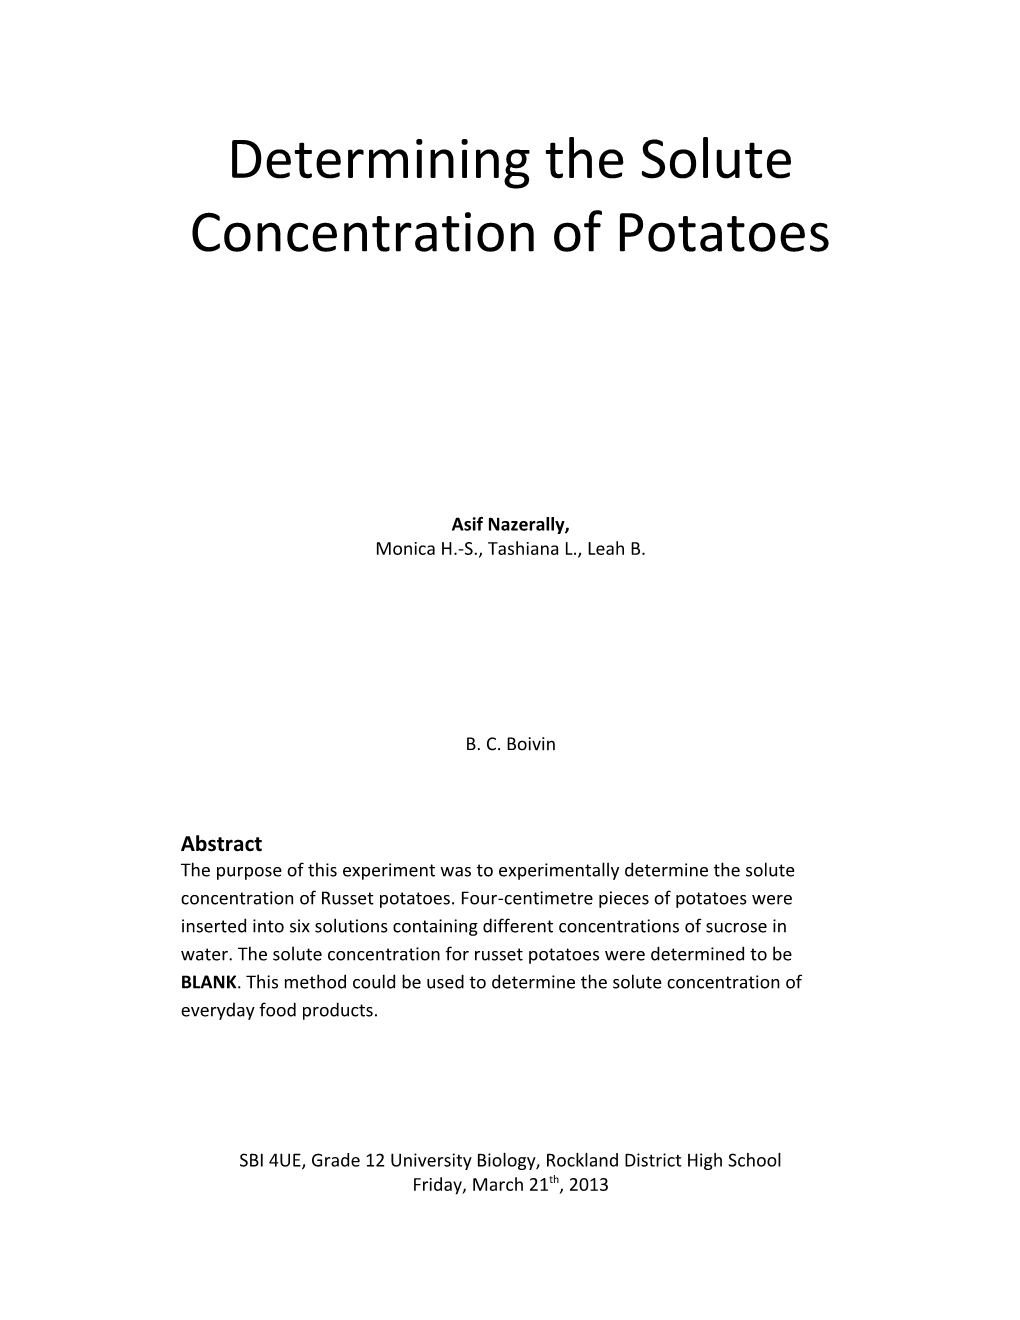 Determining the Solute Concentration of Potatoes